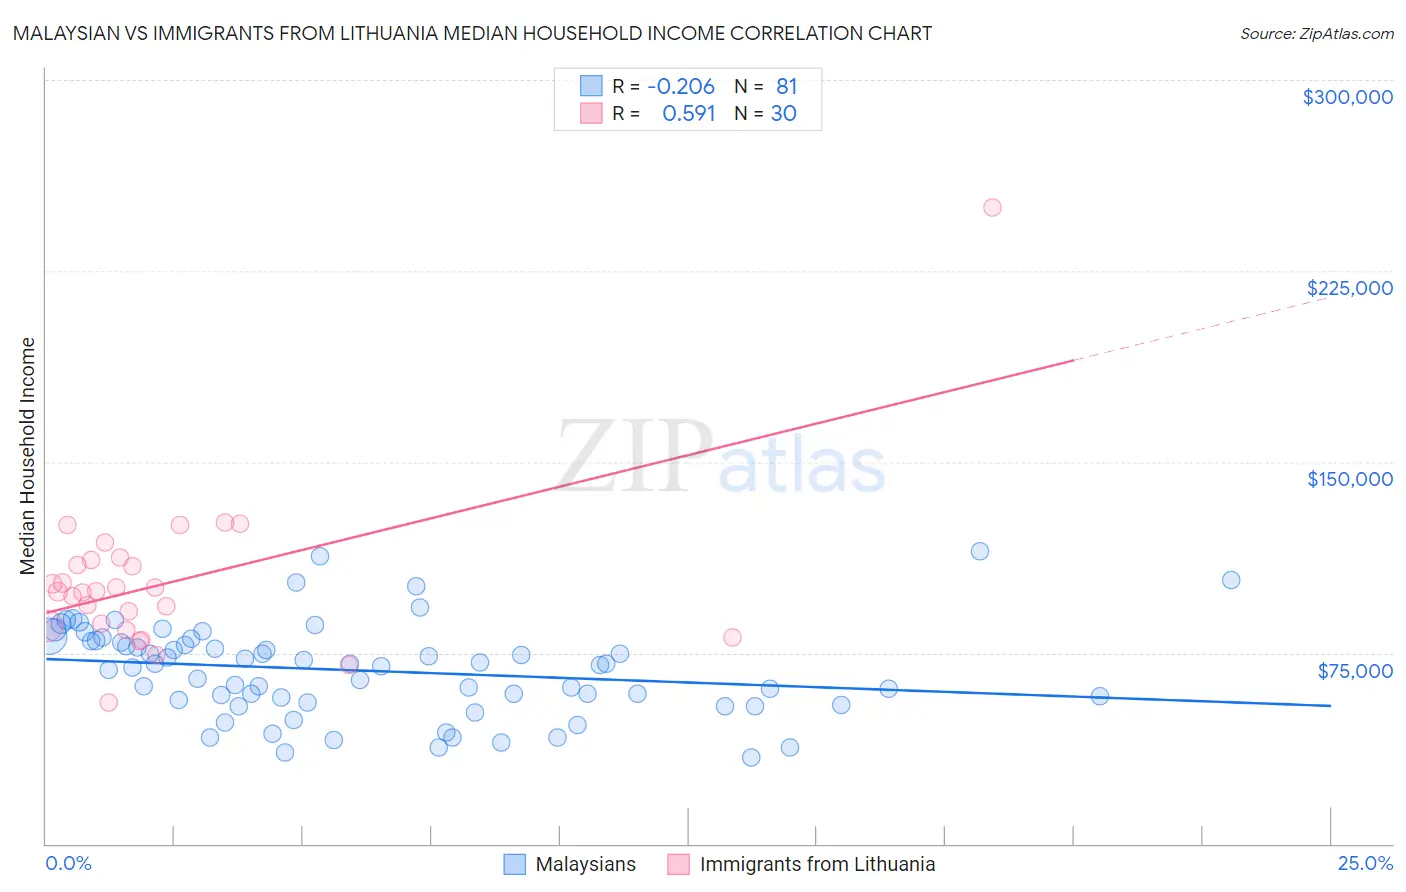 Malaysian vs Immigrants from Lithuania Median Household Income